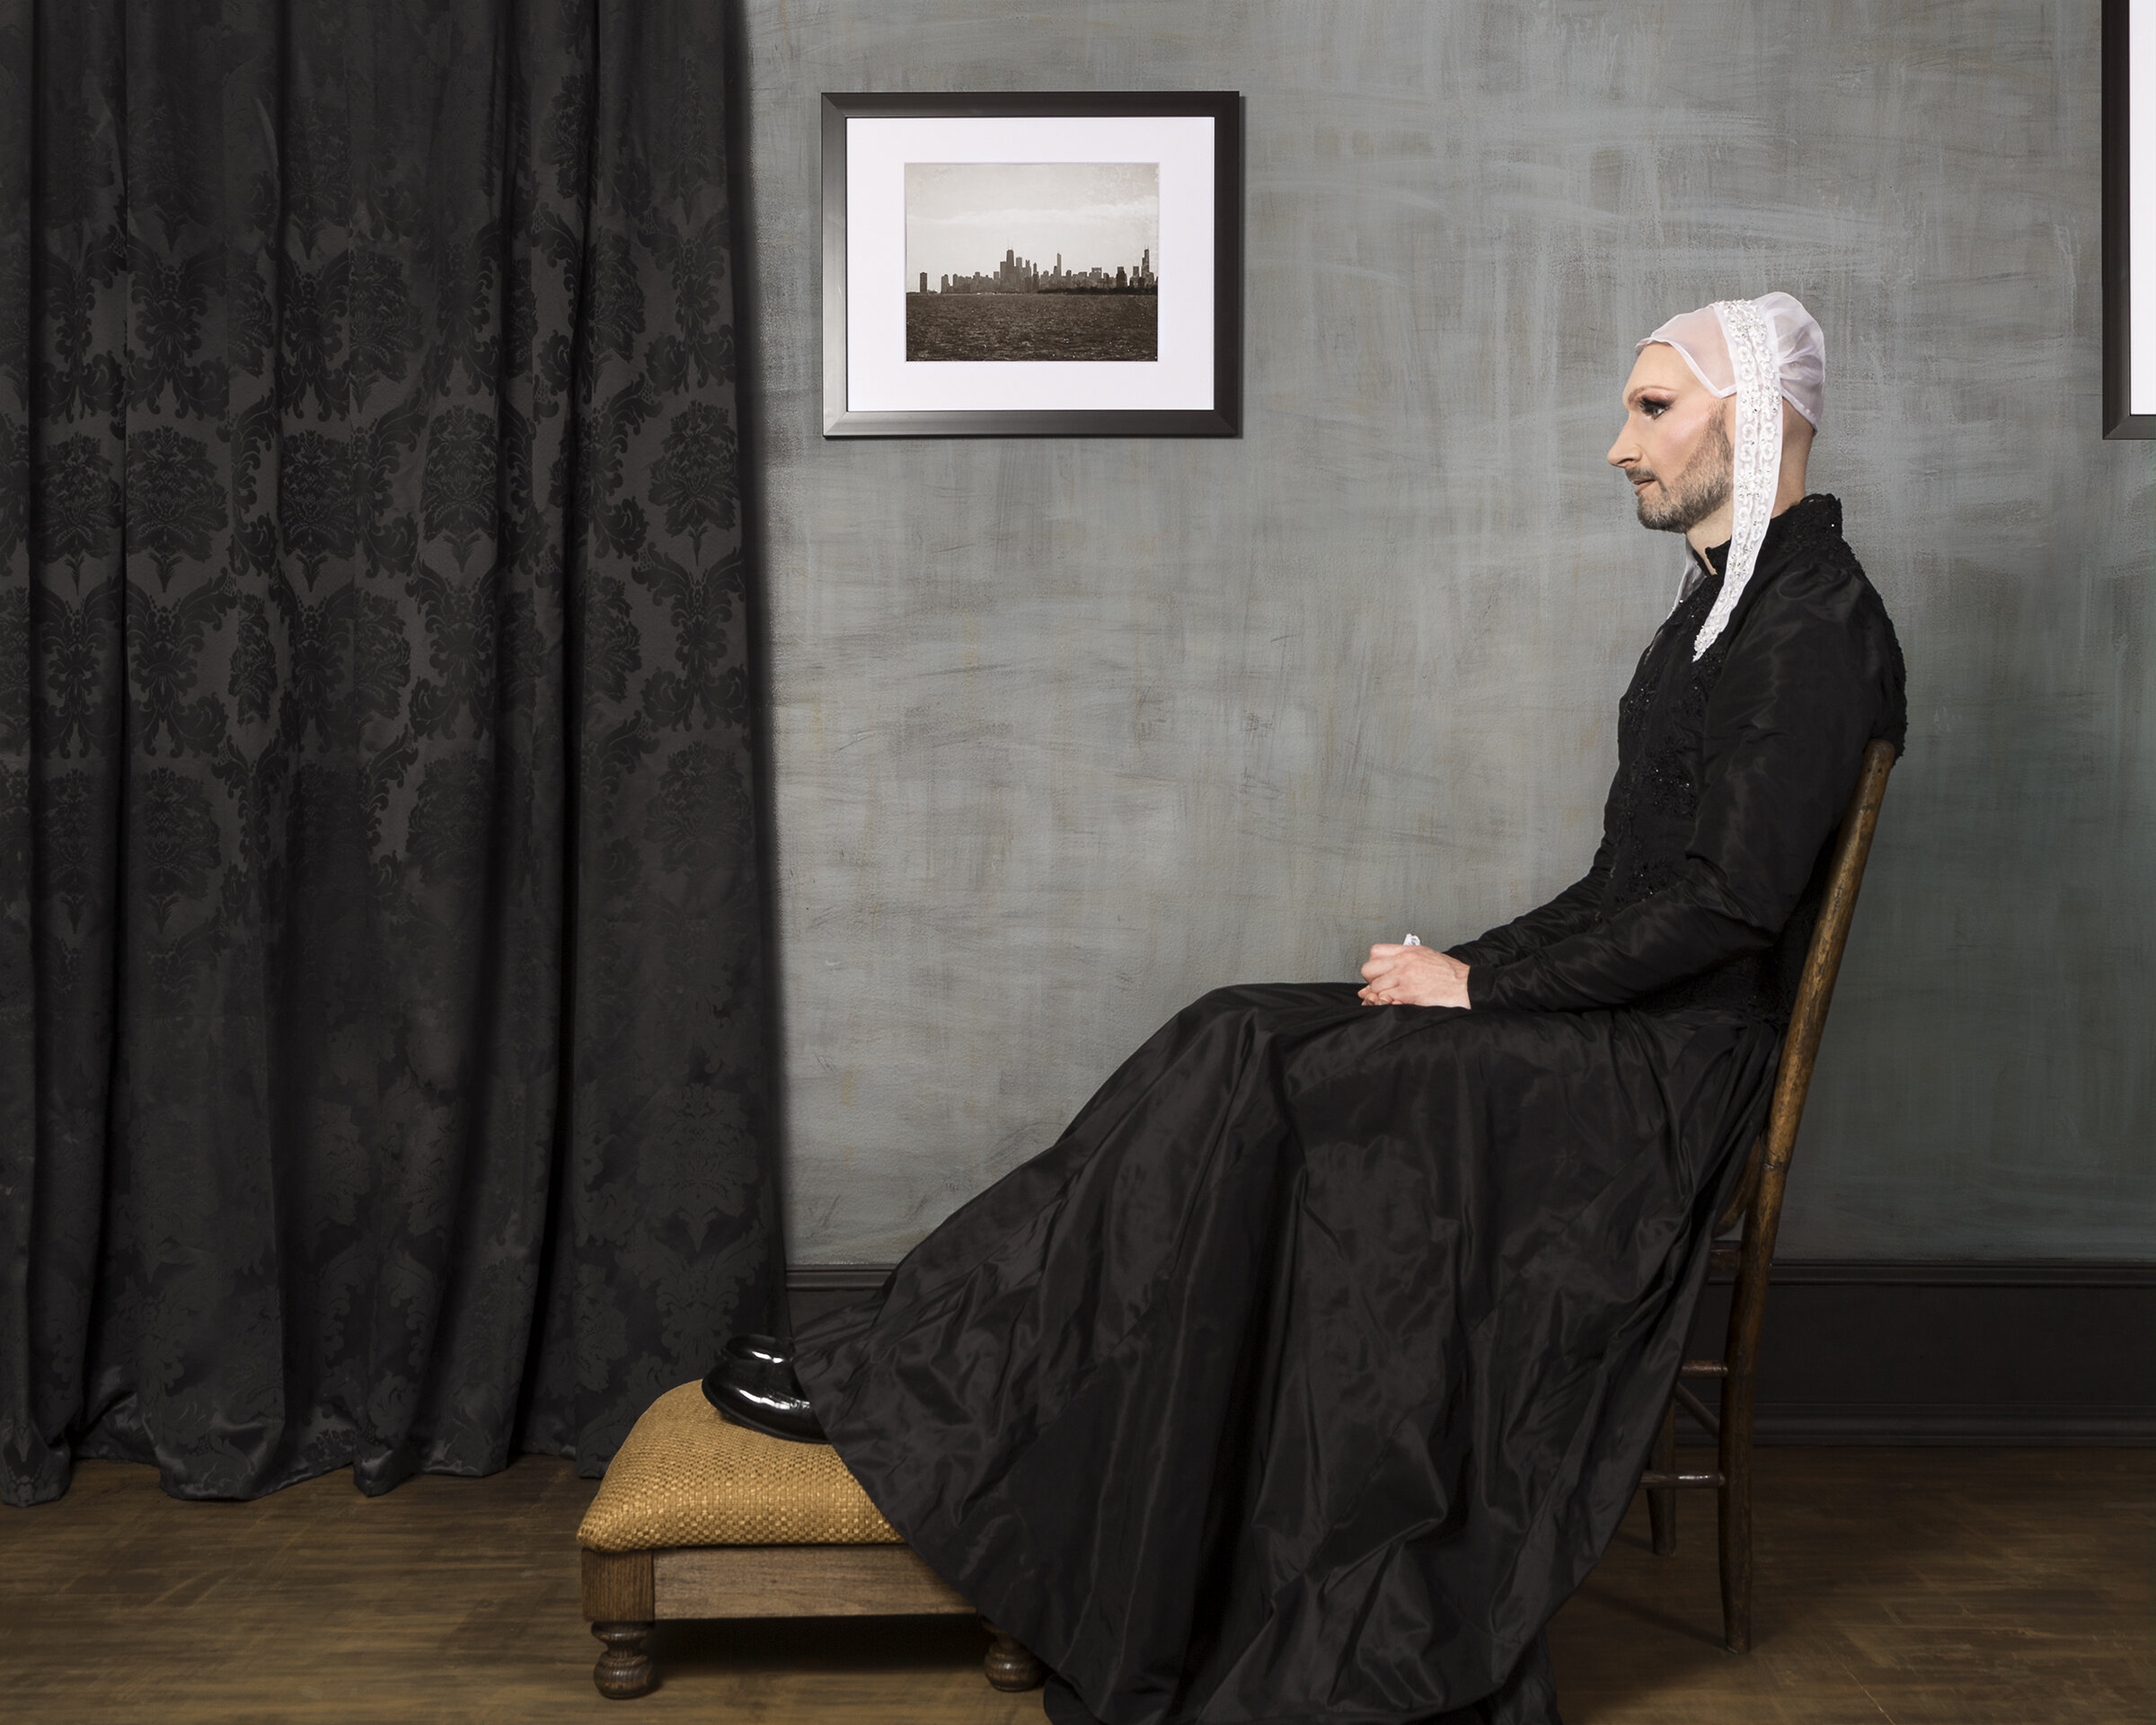  Whistler’s Mother (after Whistler), 2015 